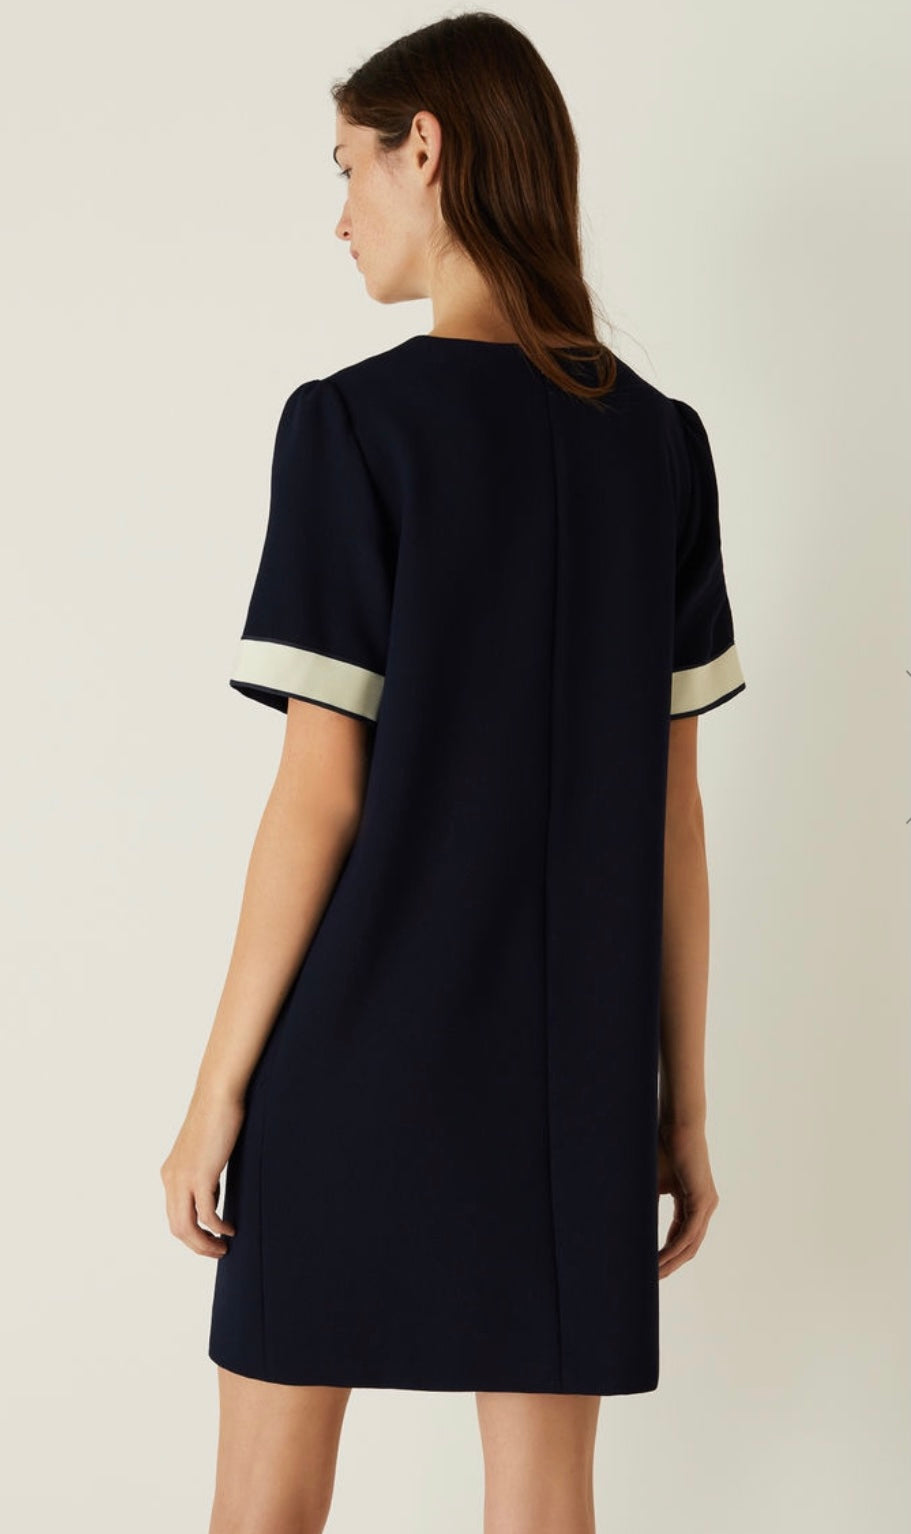 Marella	Navy Dress with trim accents